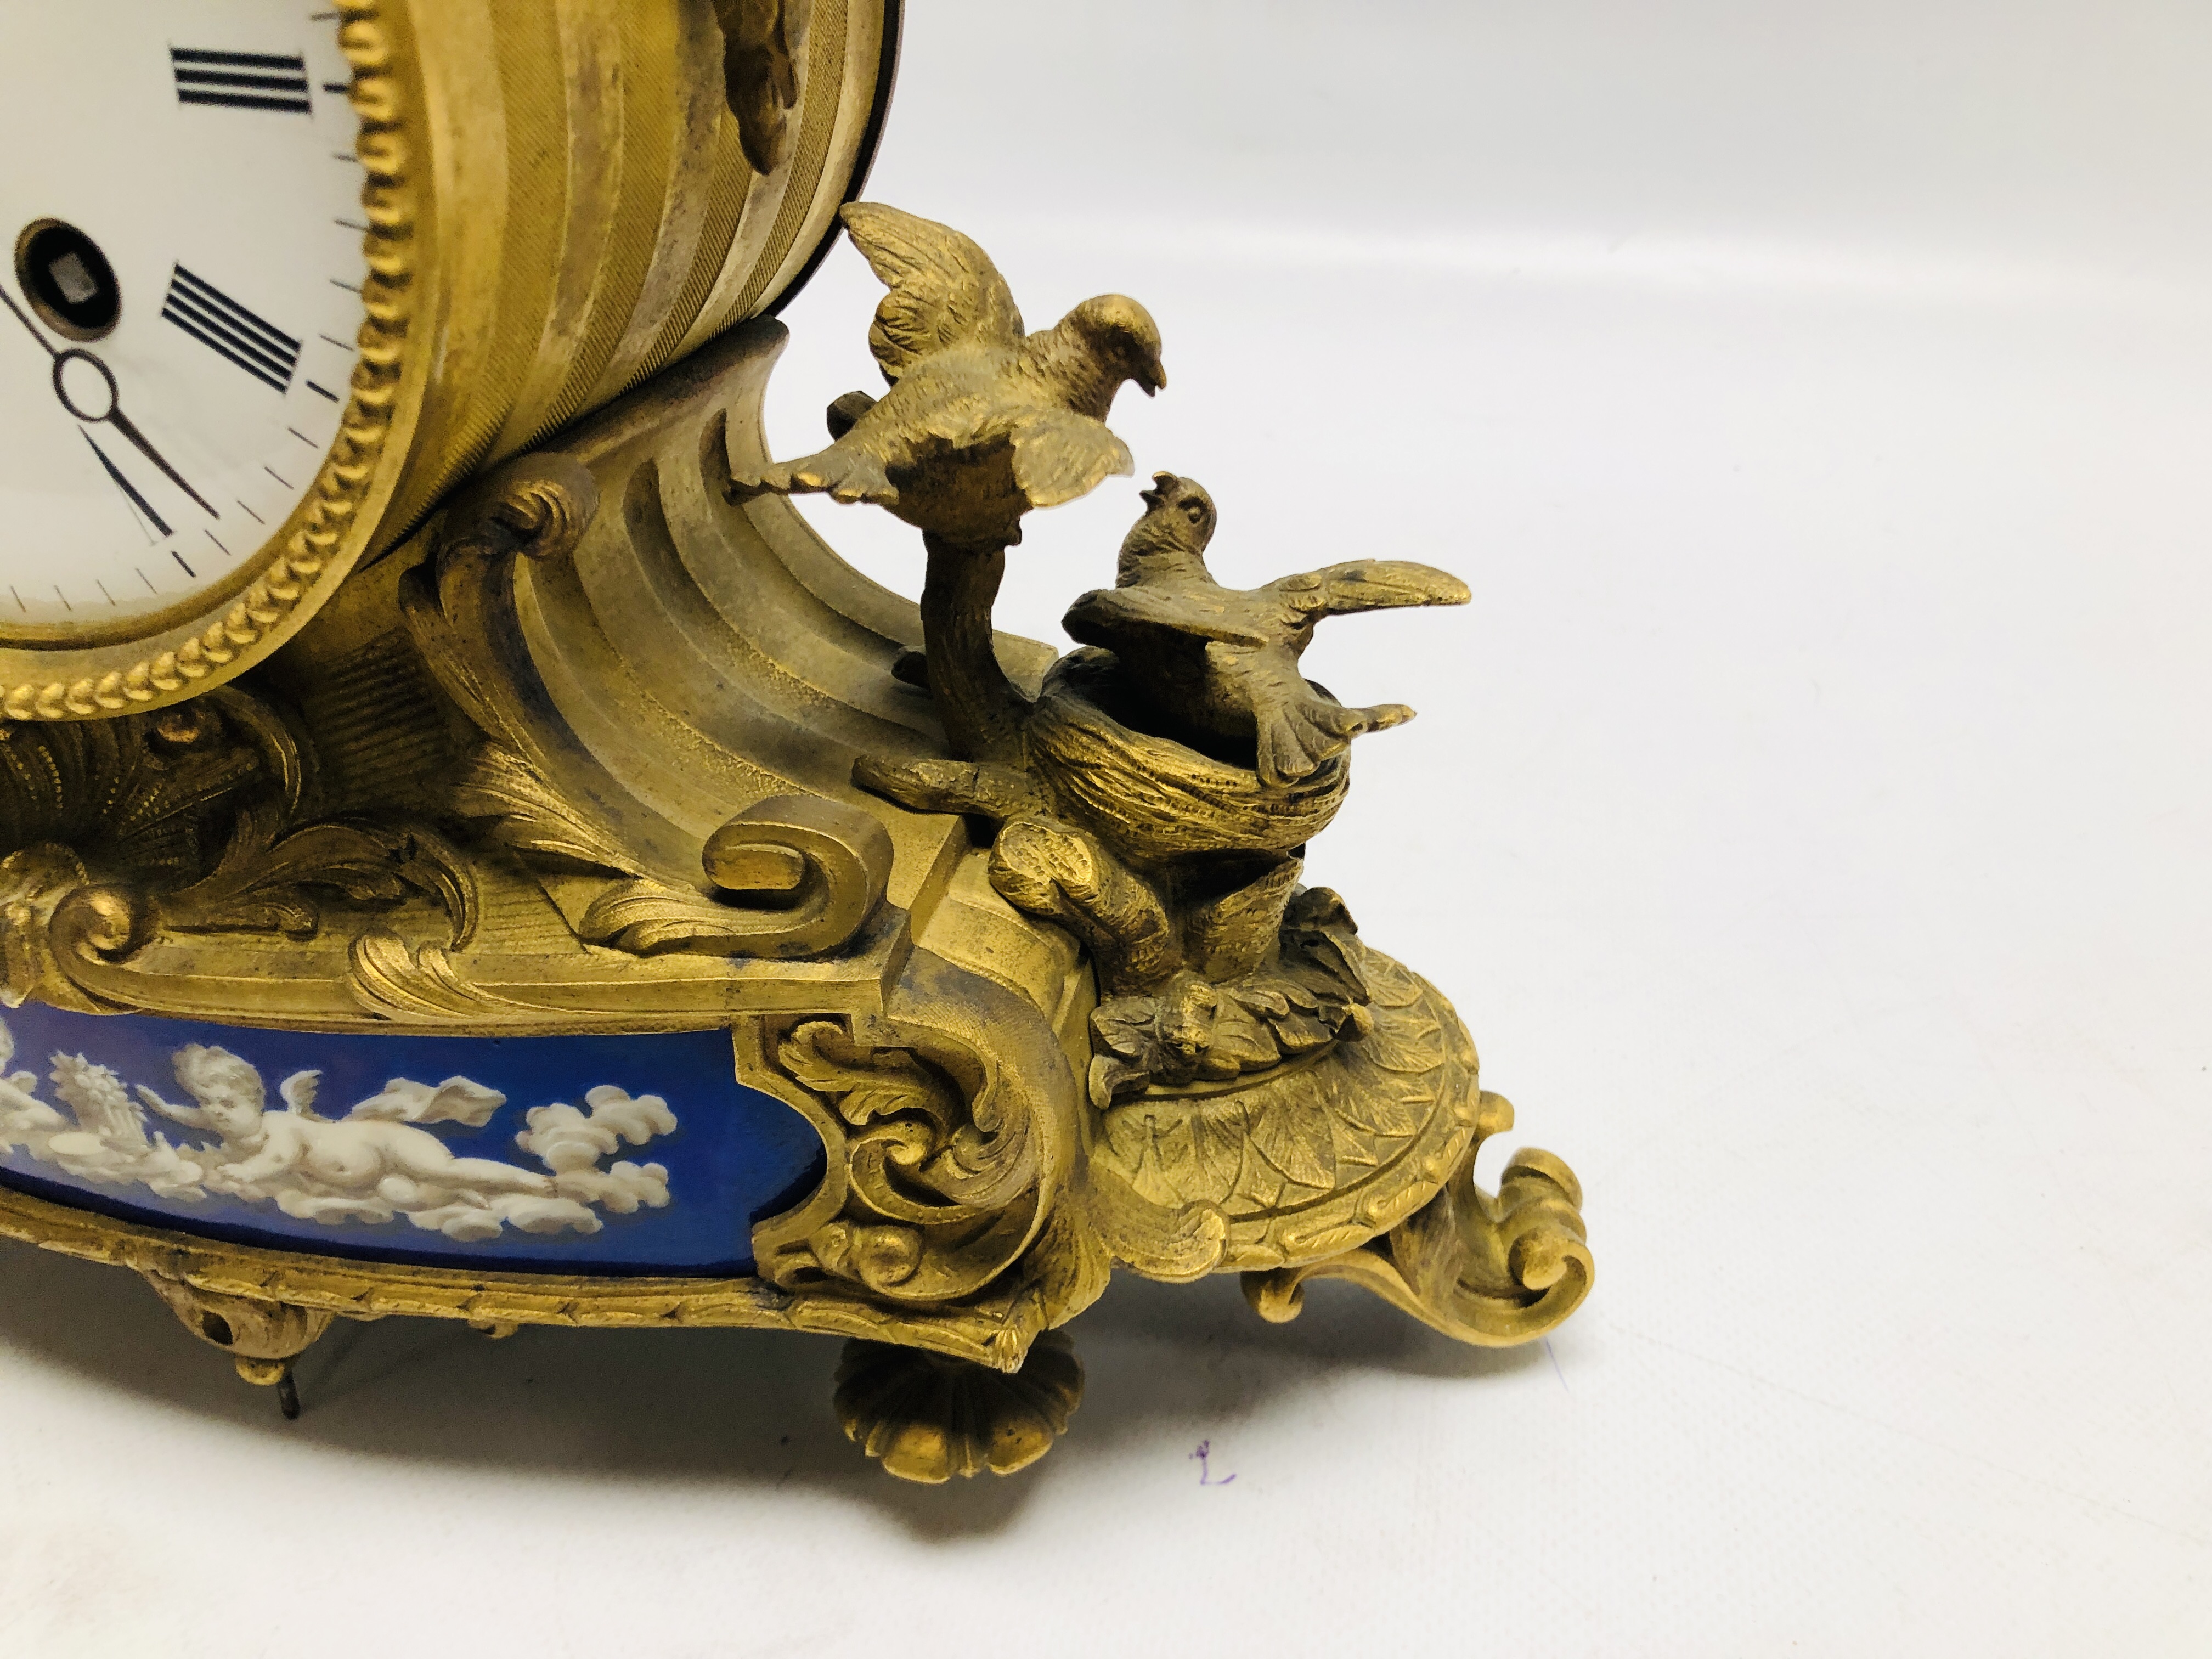 AN ORNATE BRASS MANTEL CLOCK WITH ENAMELLED CHERUB DETAILED PANEL AND NESTING BIRDS STANDING ON A - Image 10 of 15